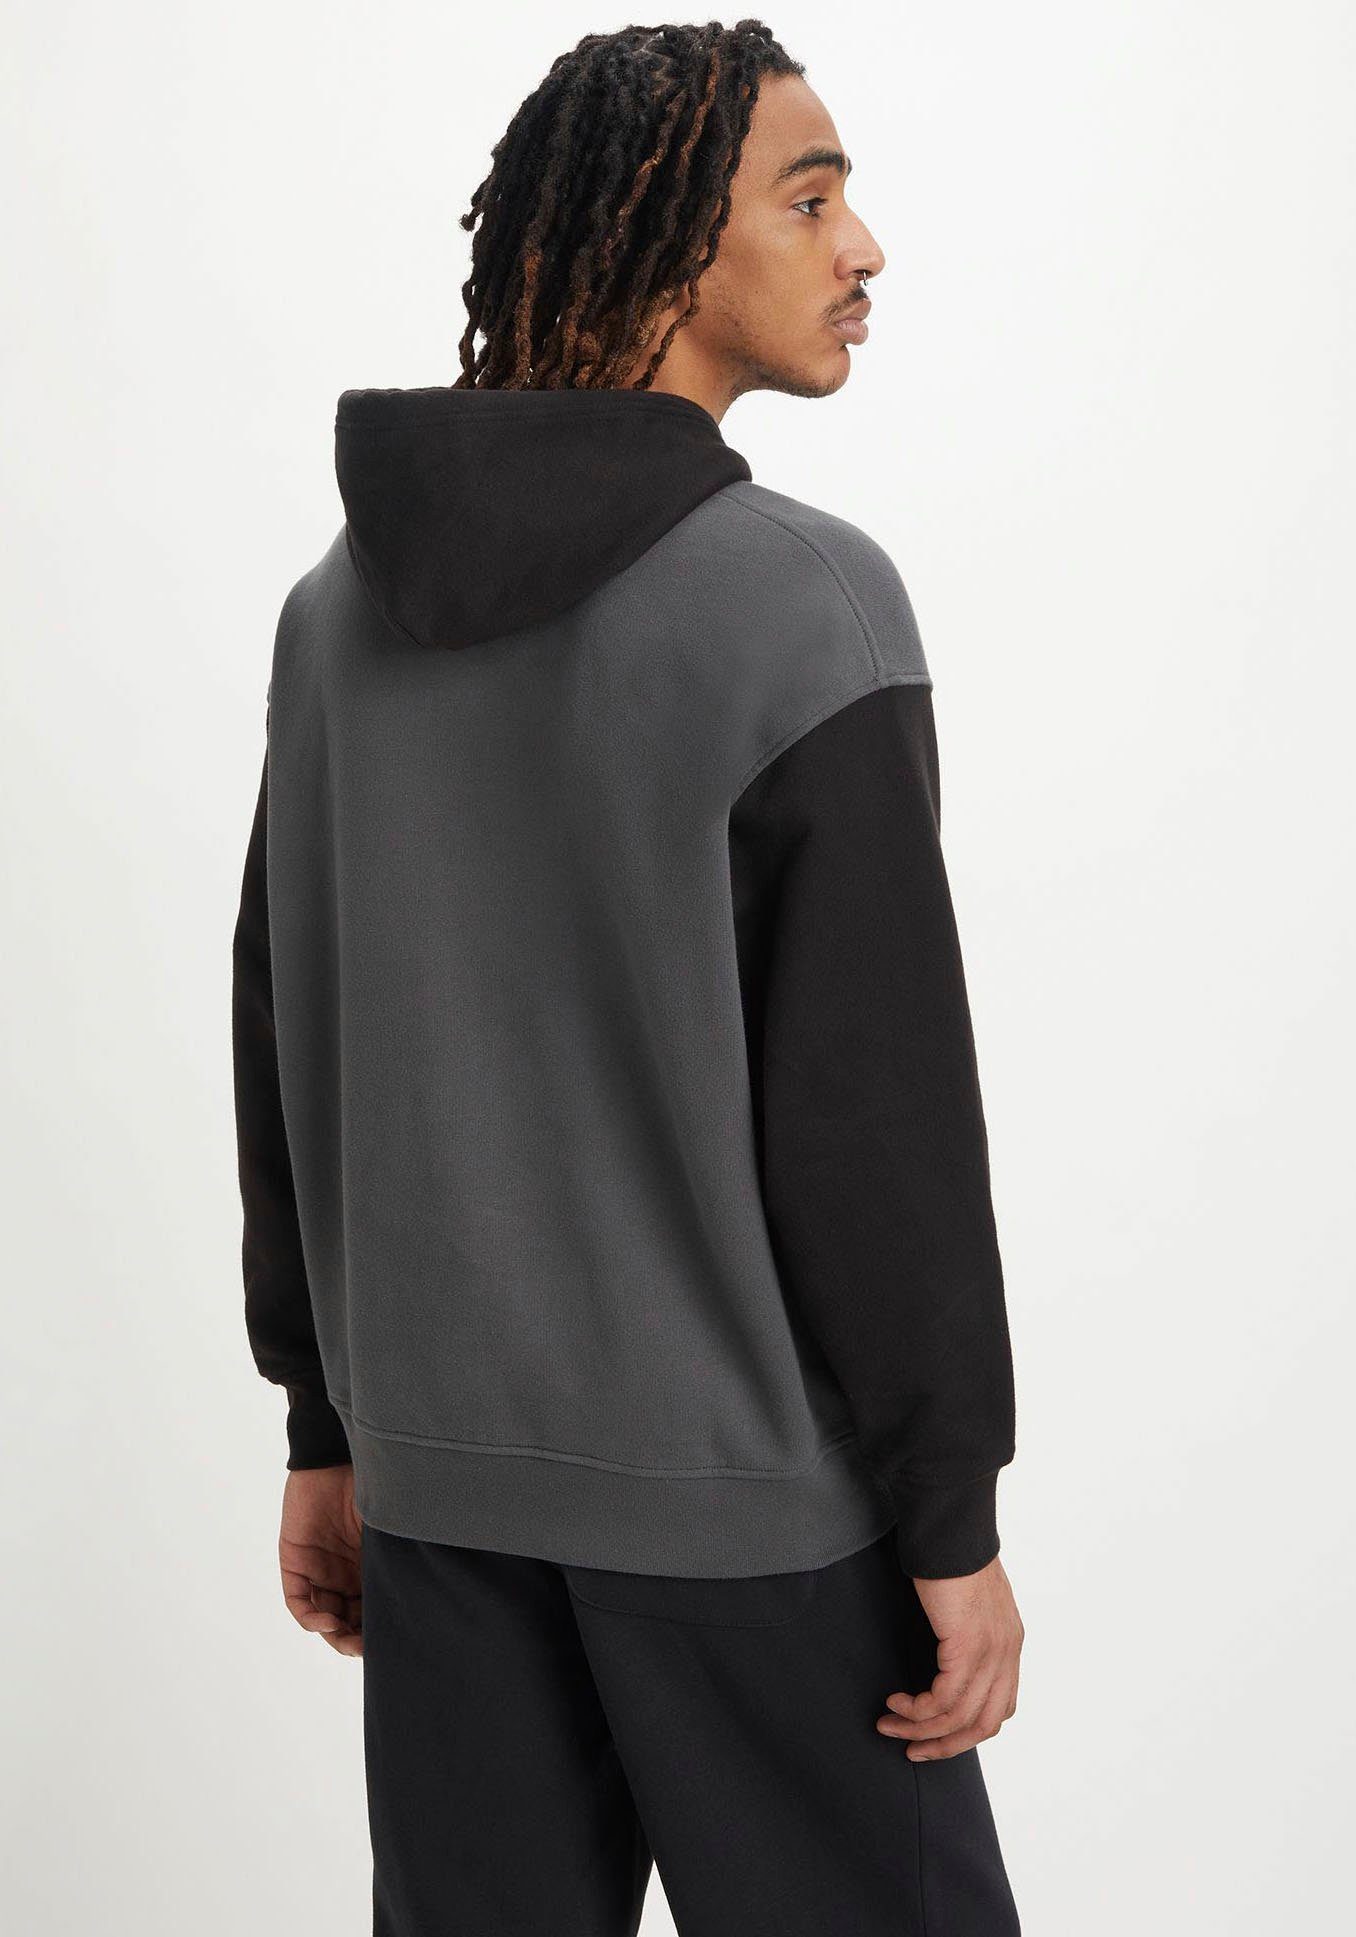 Levi's® Hoodie RELAXED GRAPHIC grau-schwarz